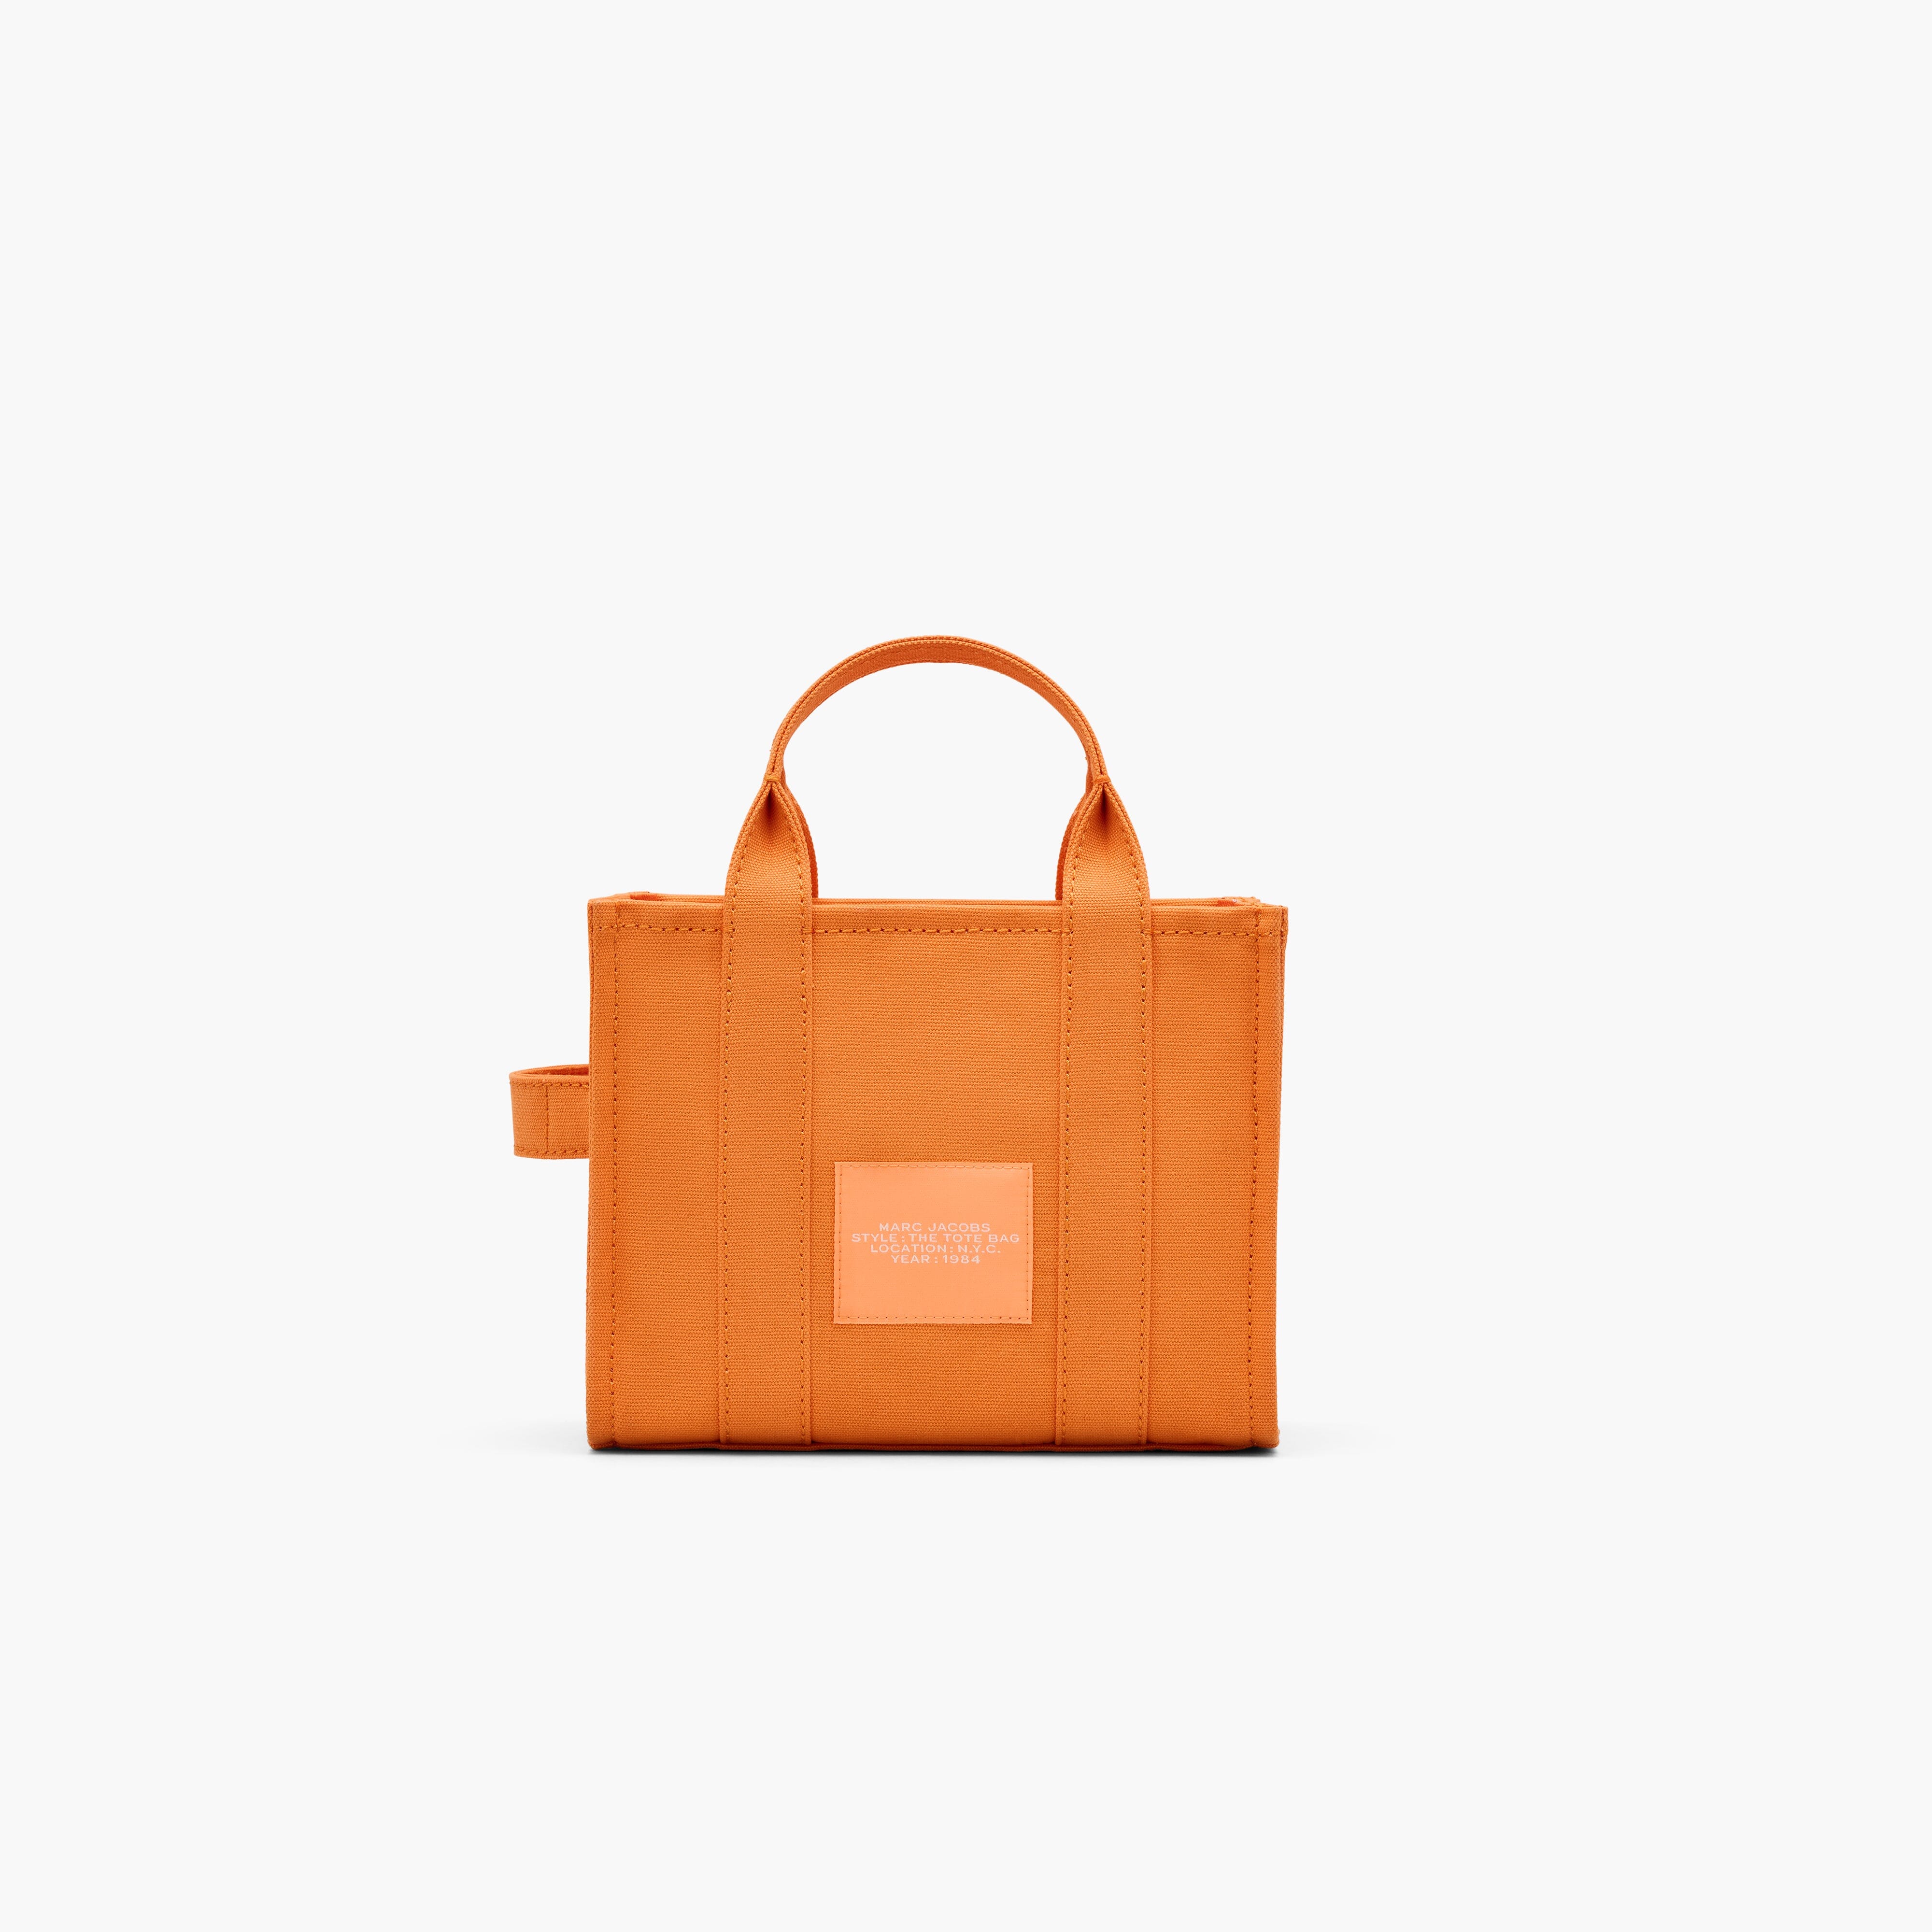 MARC JACOBS - M0016493-818 - The Summer Small Tote Bag - Tangerine Borse Marc Jacobs 